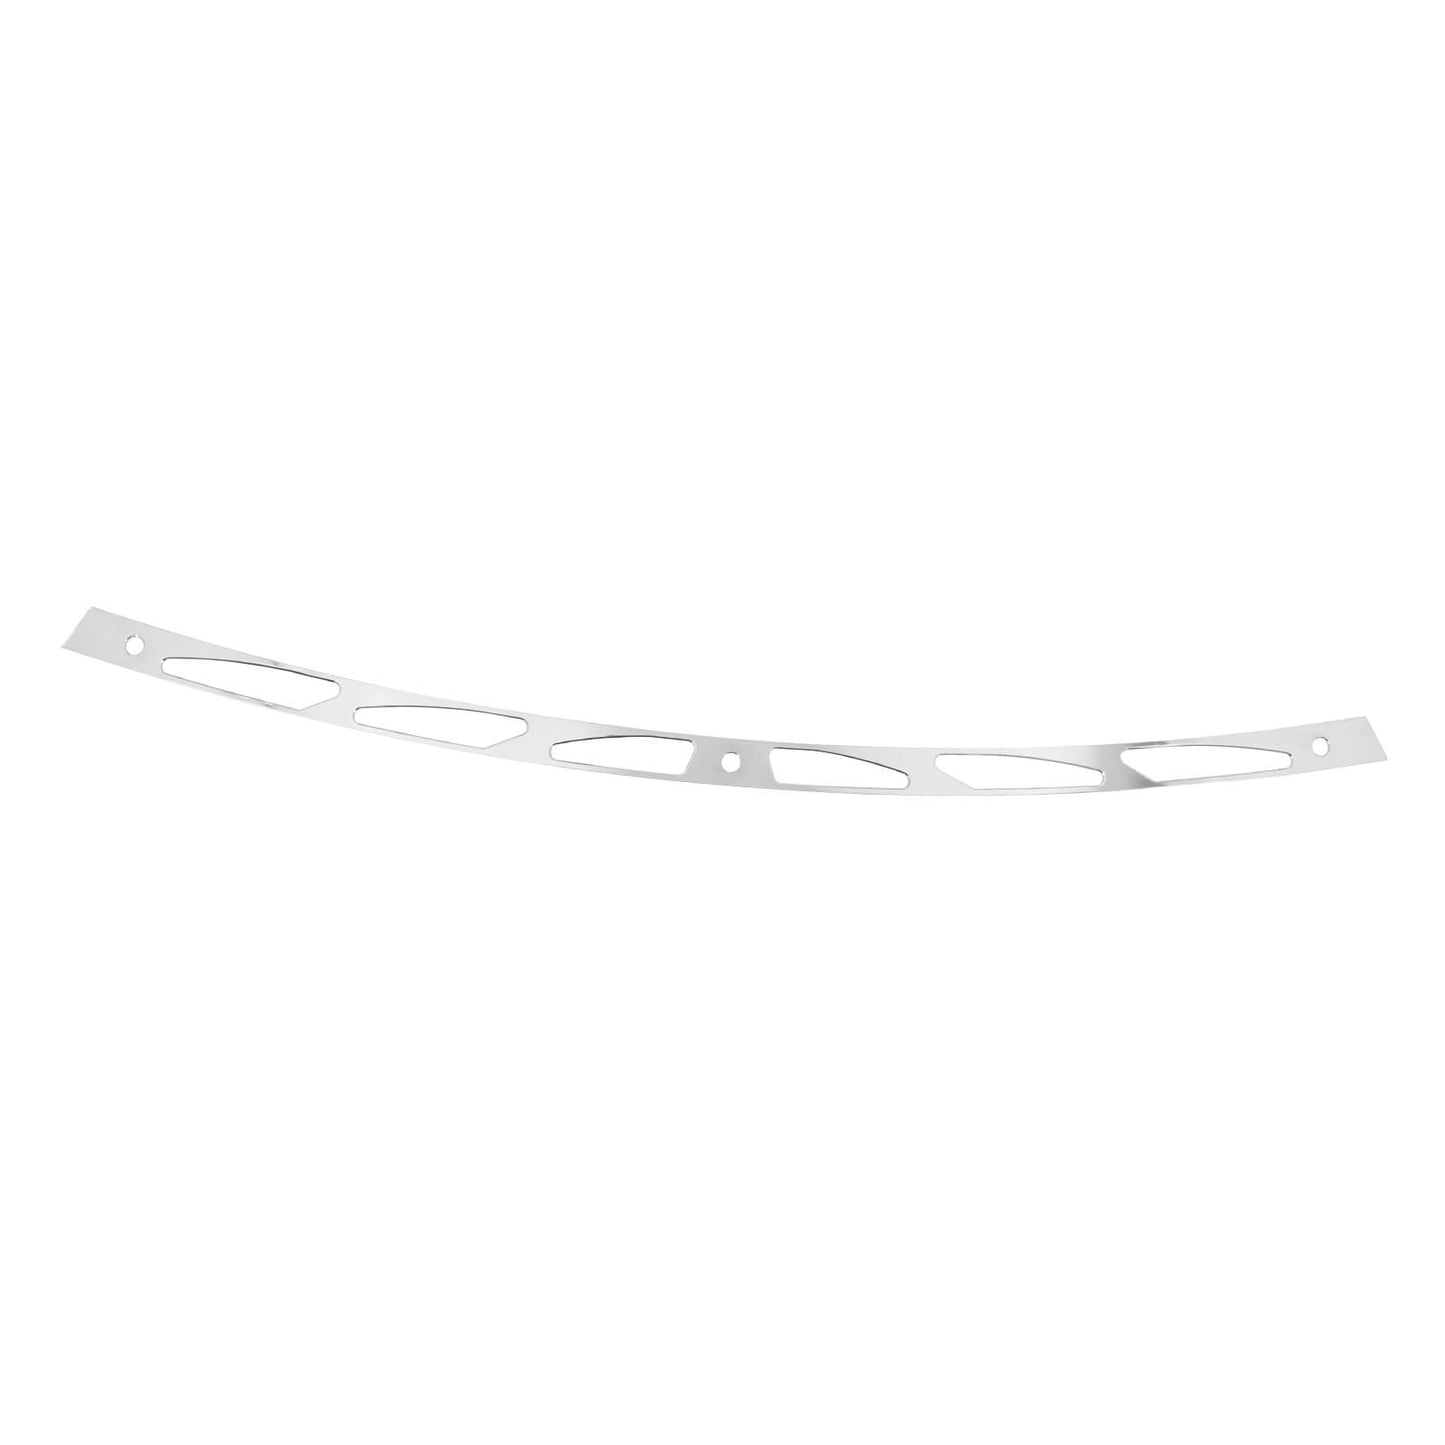 WI001104-mactions-harley-motorcycle-hollow-windshield-trim-touring